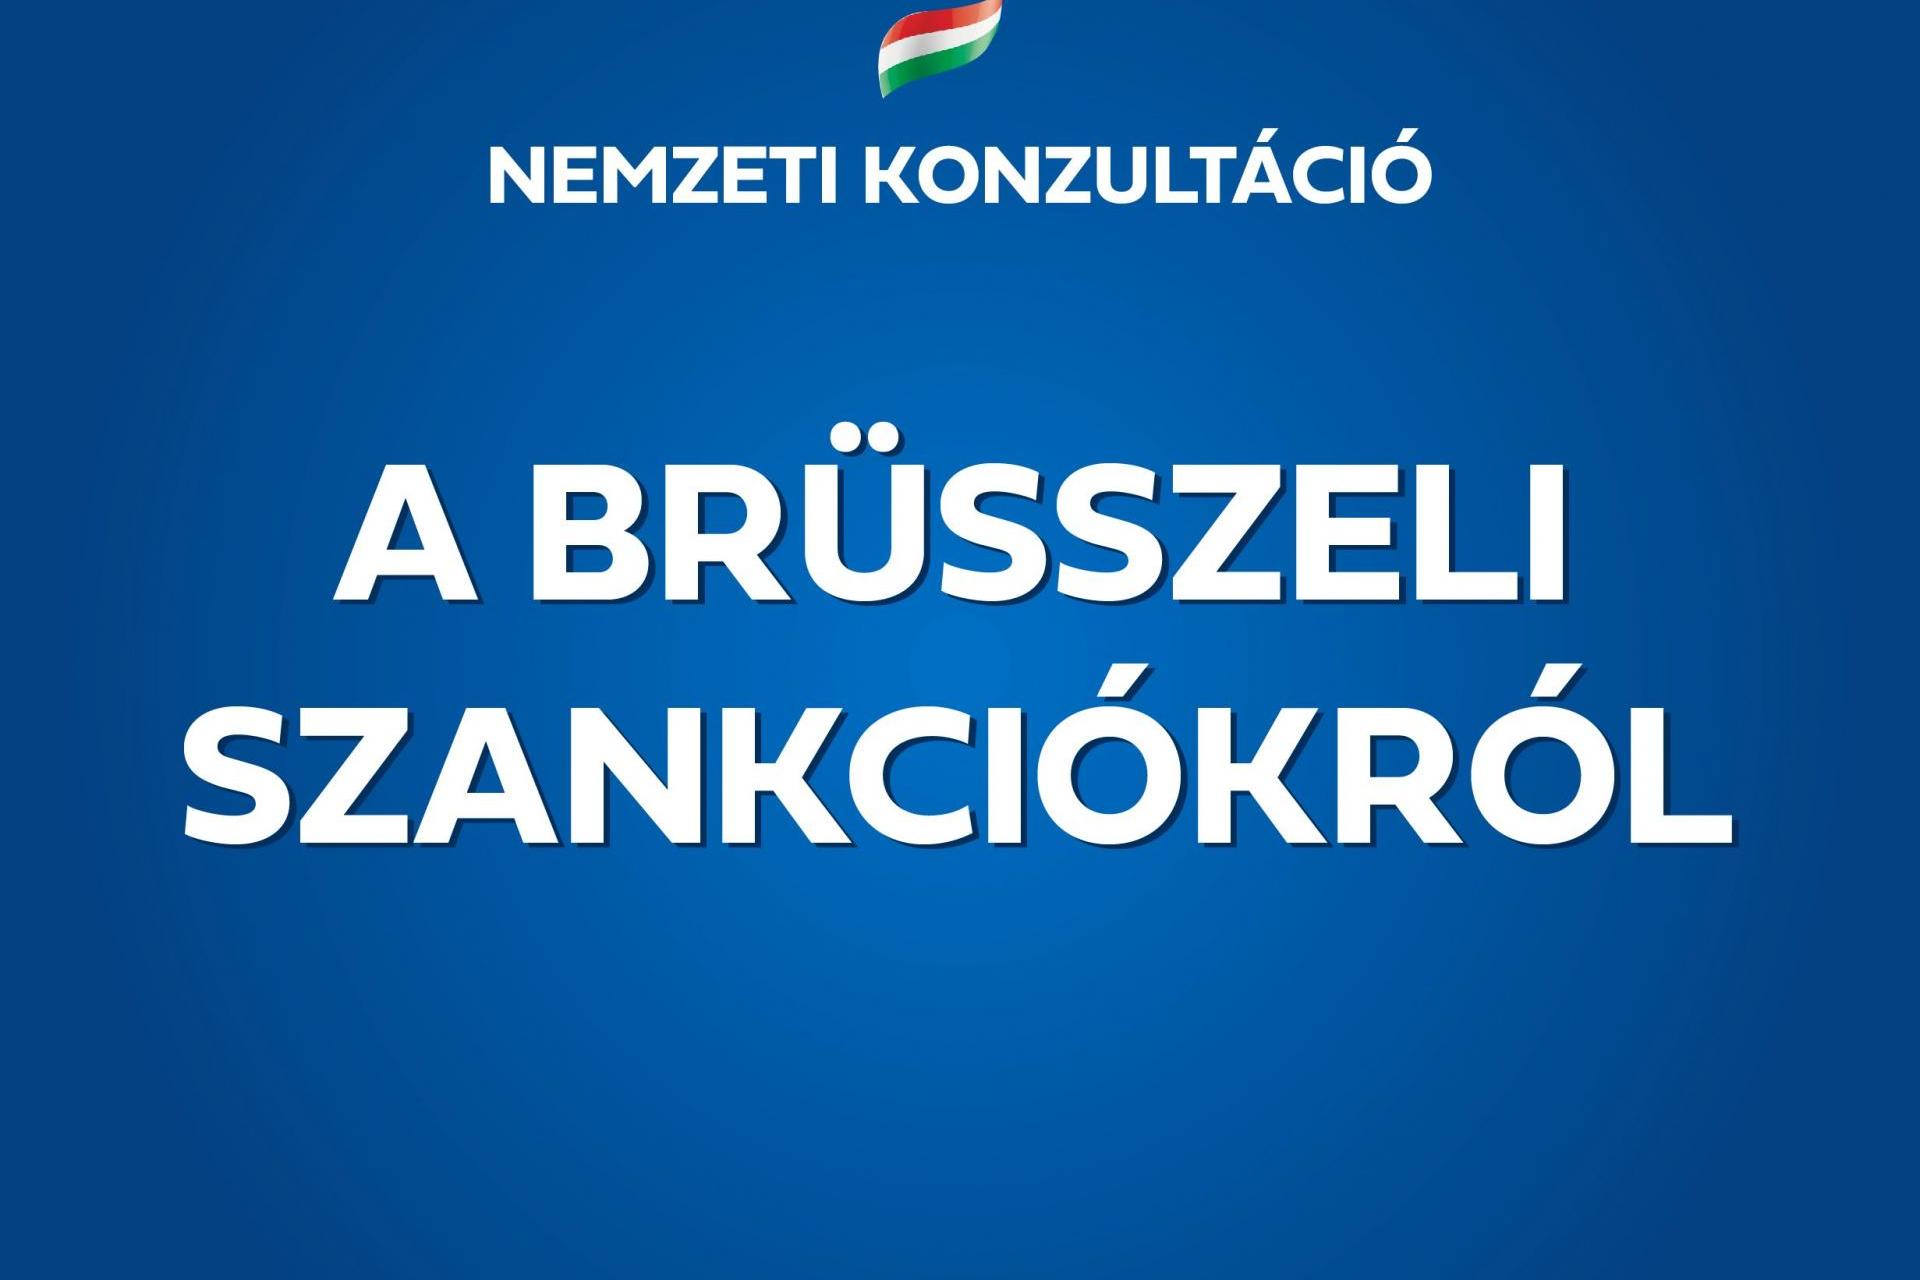 Hungarian Opinion: National Consultation on EU Sanctions Concluded